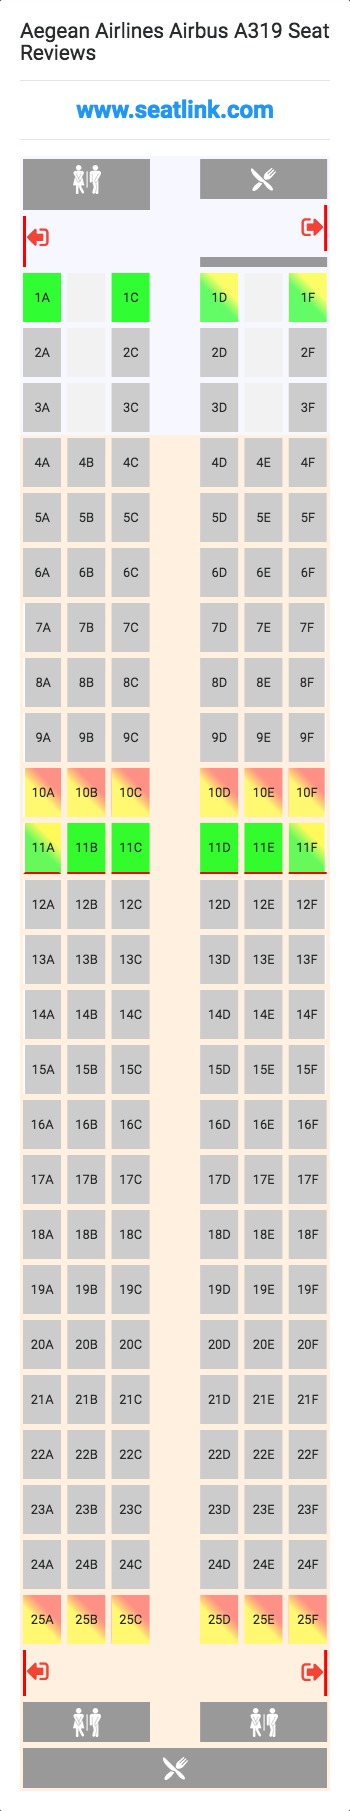 Airbus A319 Seating Chart Sarta Innovations2019 Org